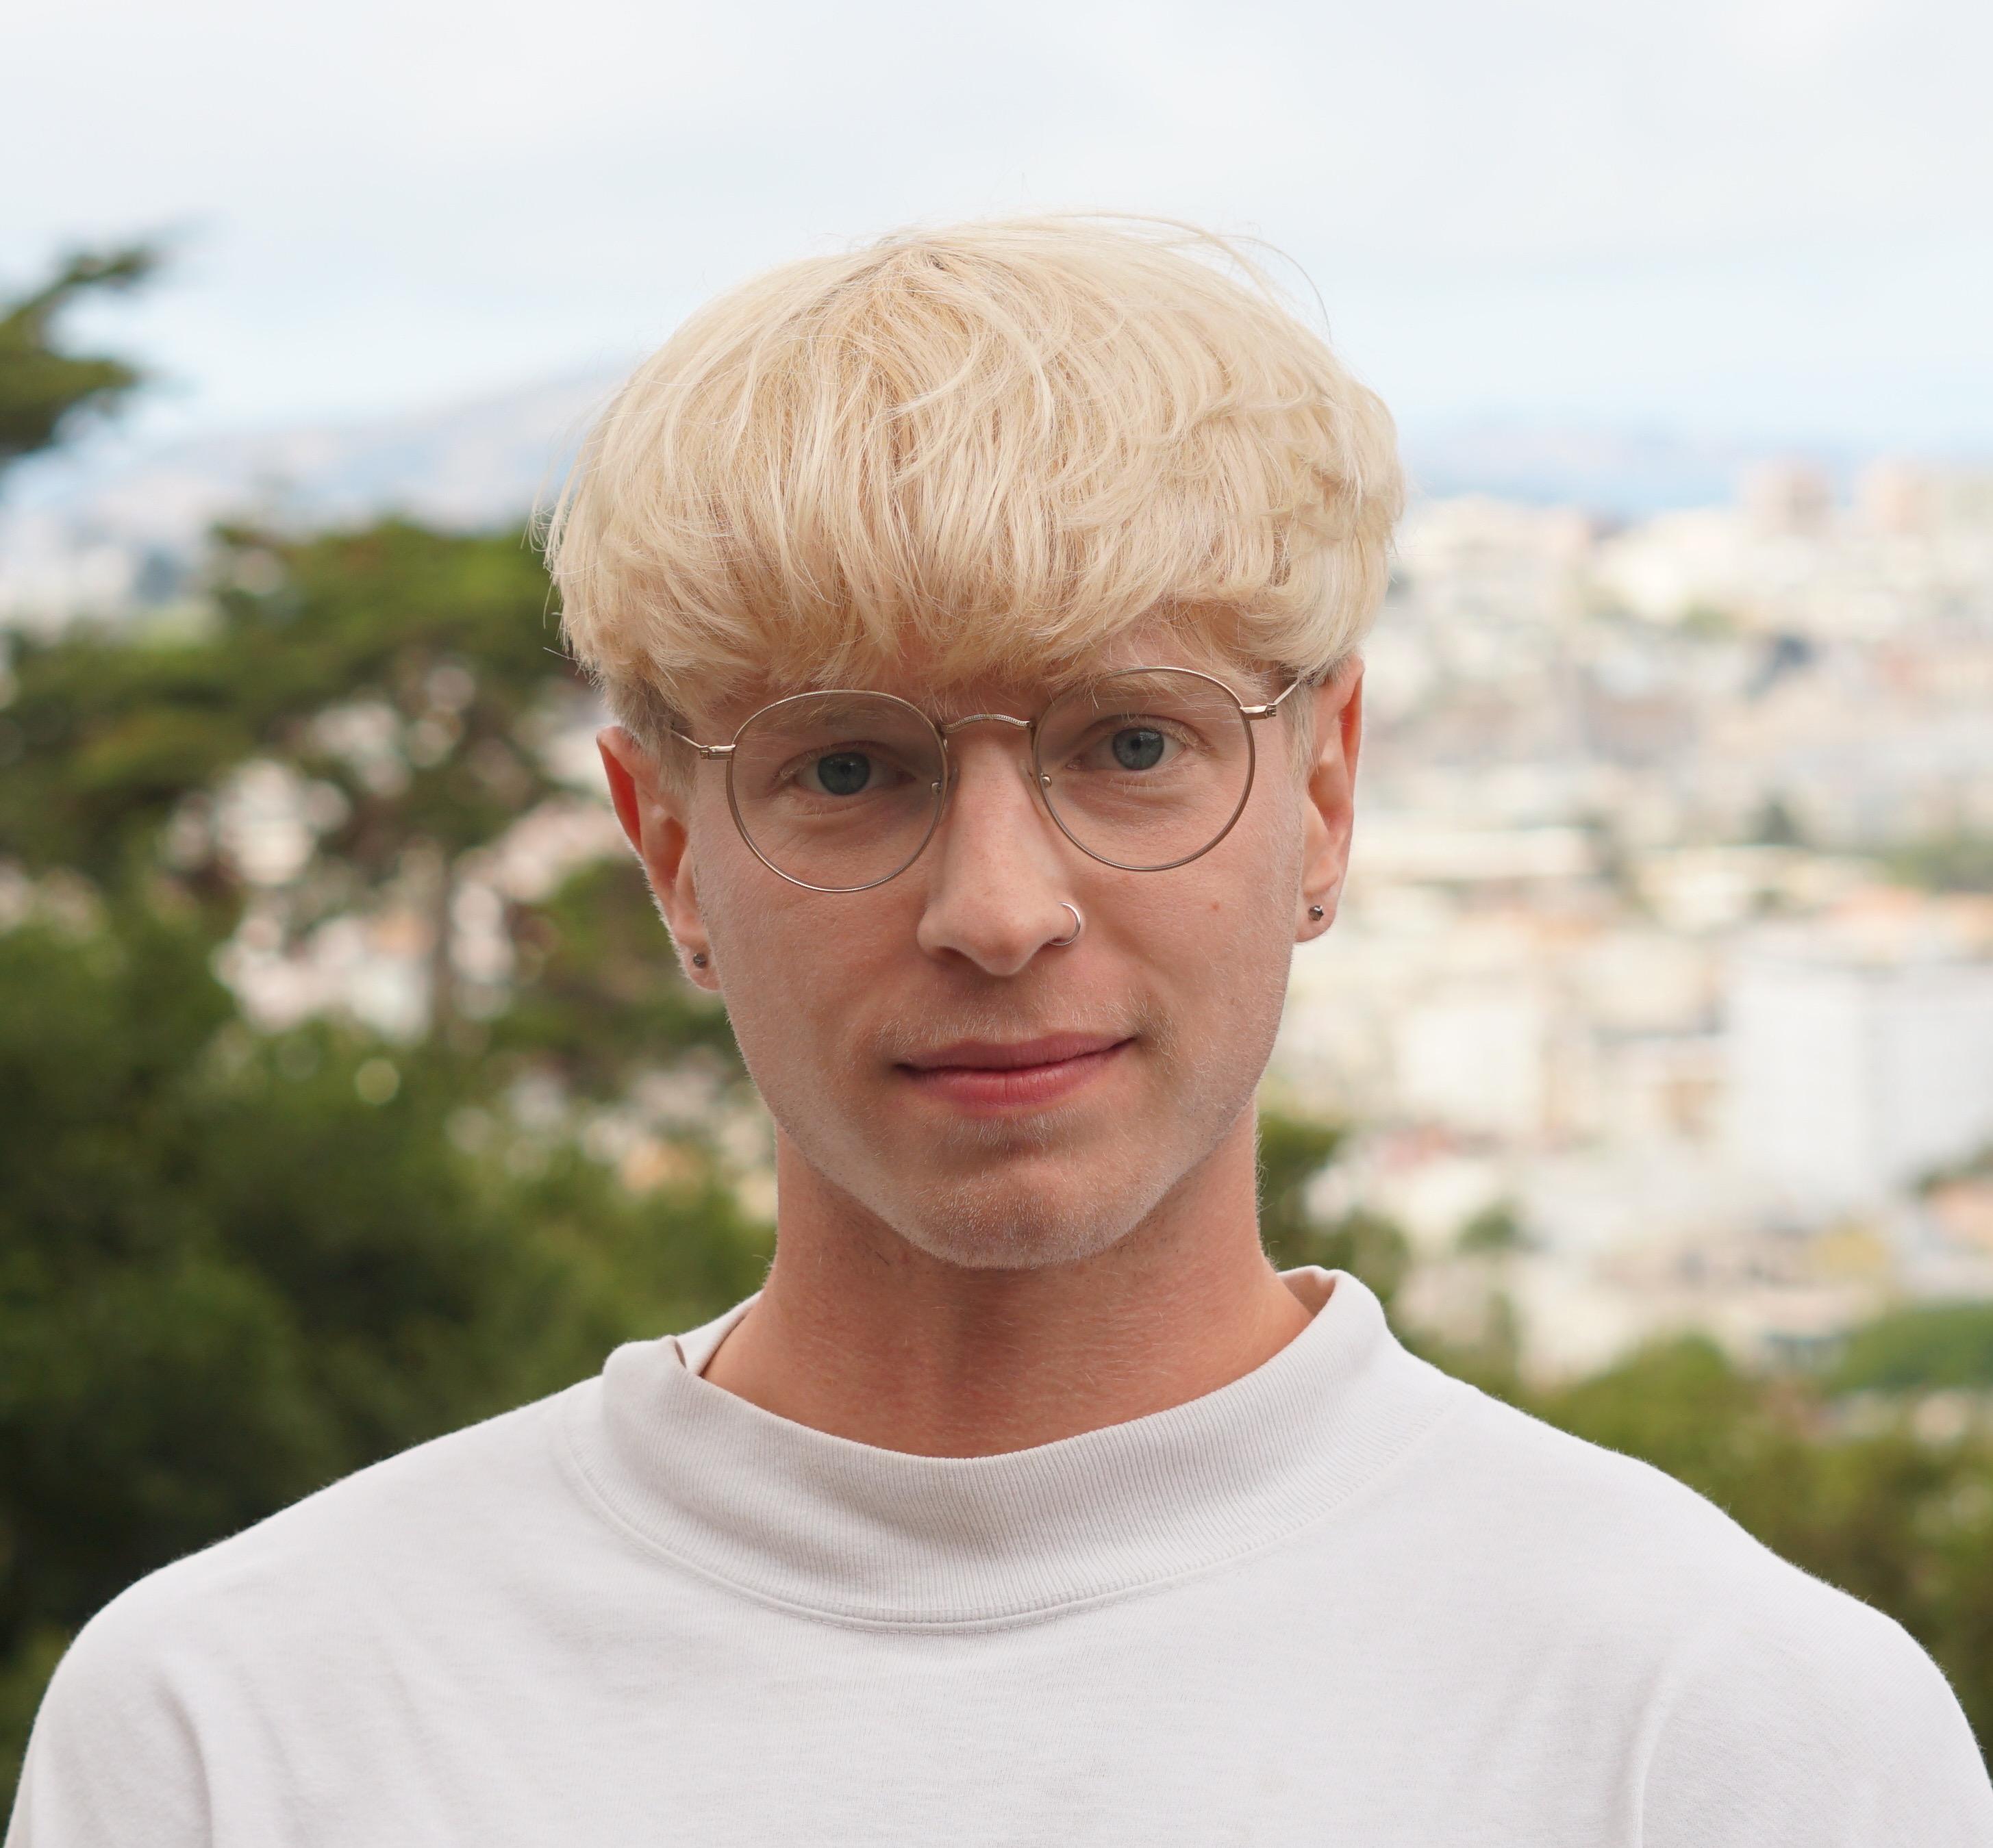 photograph of a blond person wearing wireframe glasses and a white mockneck staring into the camera.